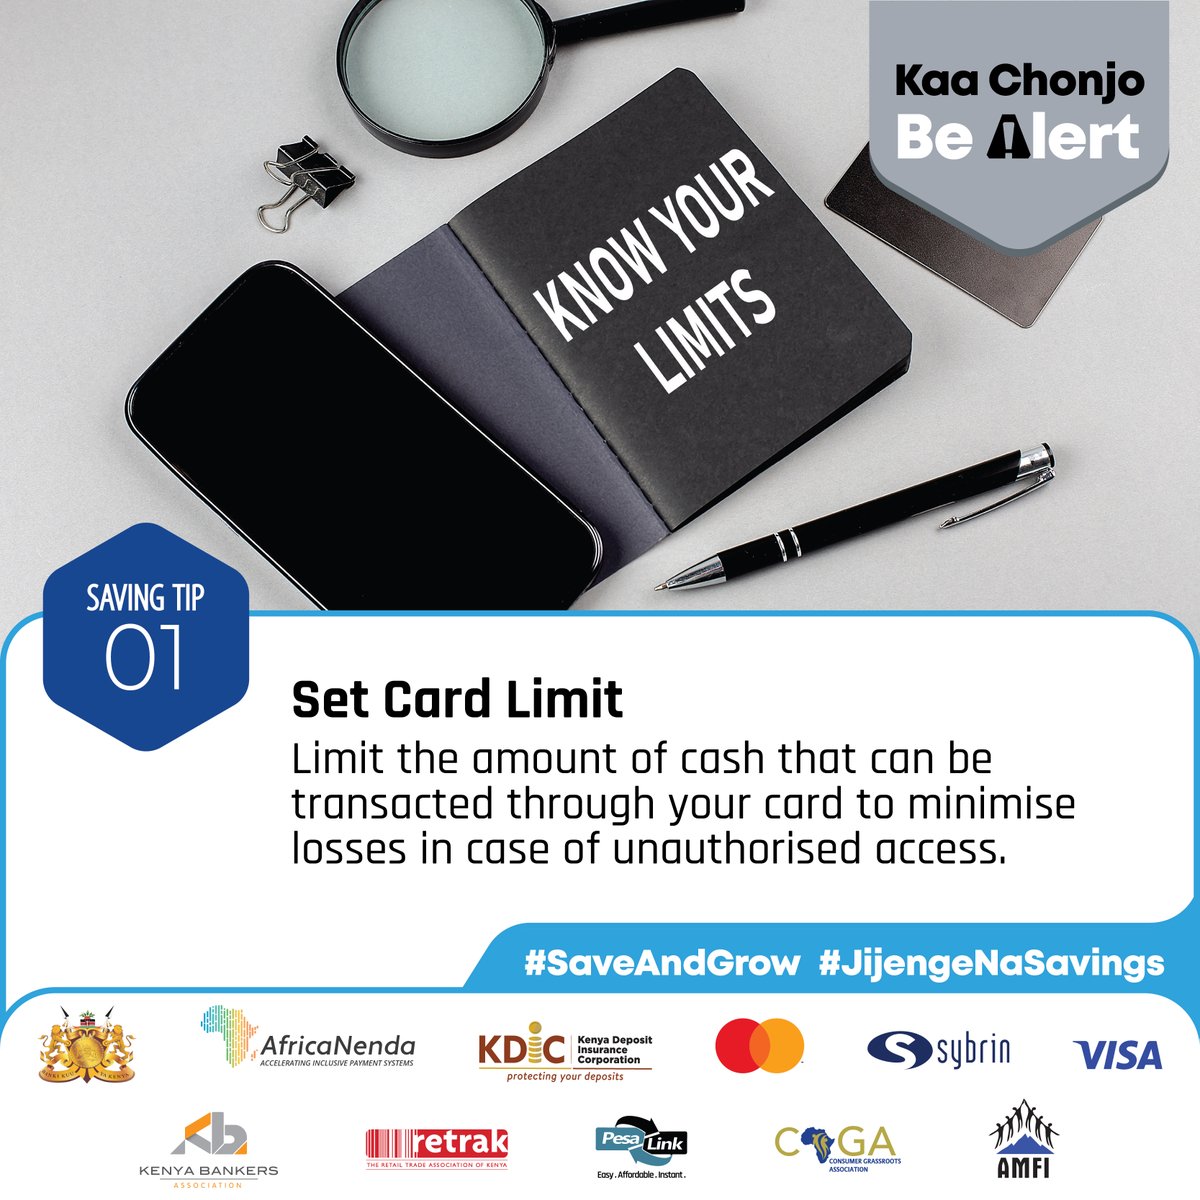 Kaa Chonjo, Set a limit of the amount that can be transacted on your card. Setting a limit will help prevent loses in case you lose your card to malicious individuals.

Usikubali kugongwa!

#KaaChonjo #AccessCares #MoreThanBanking